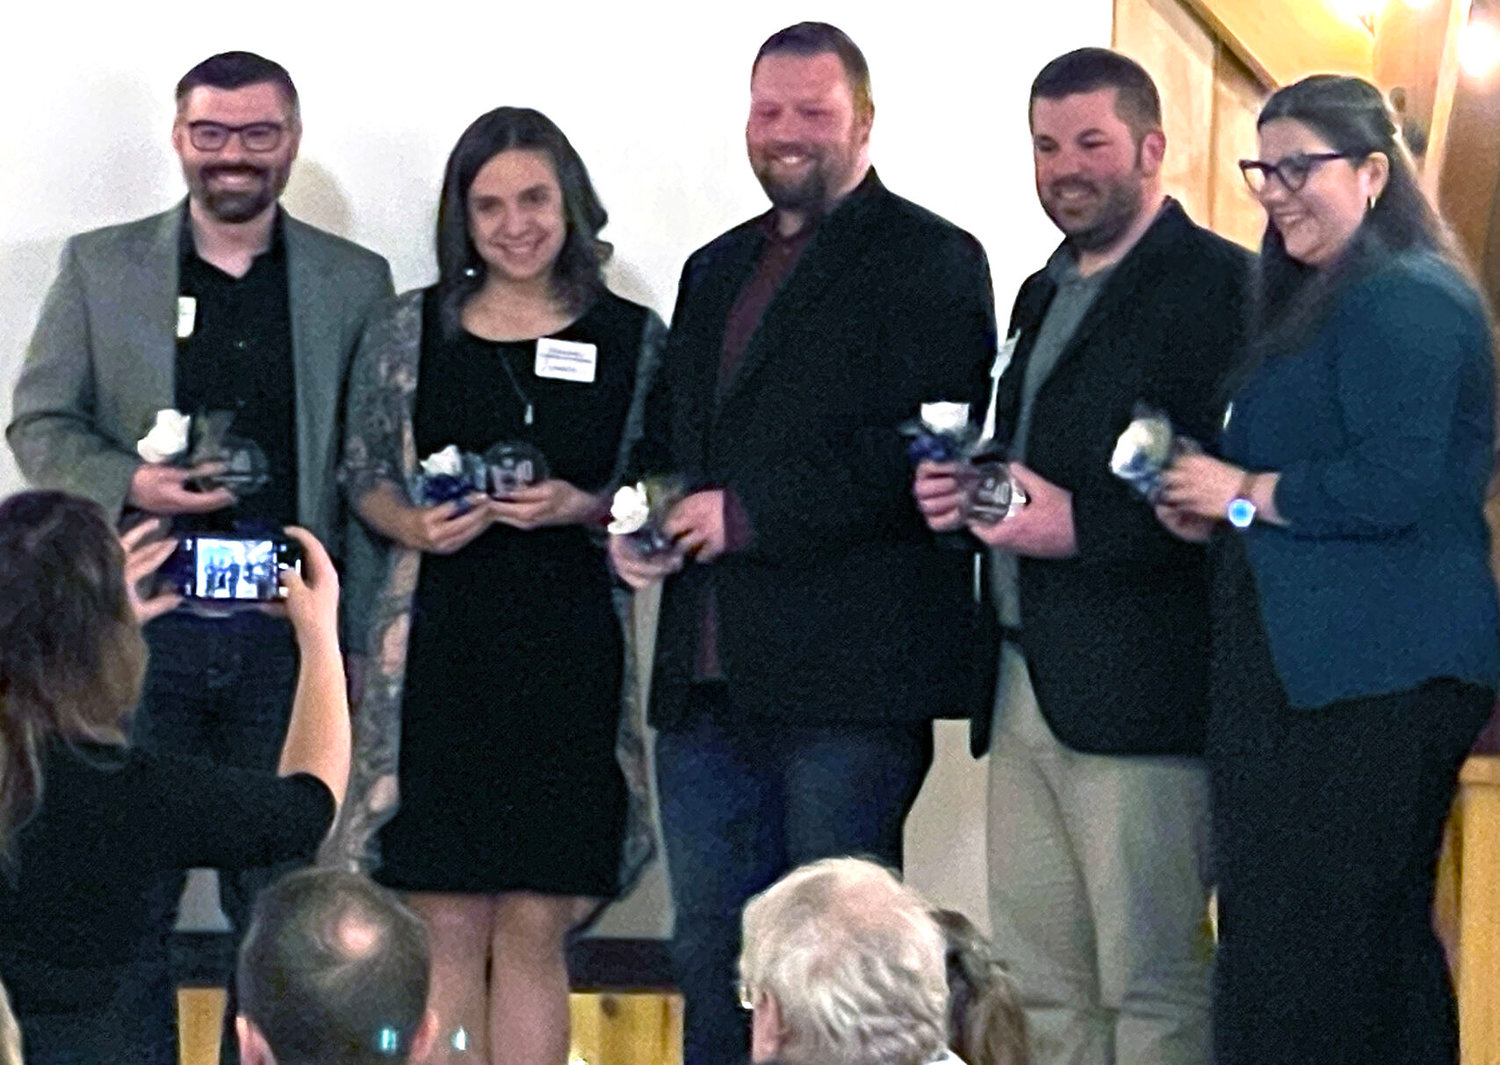 Matt Kennedy, Valorie Bolle, Brett Winder, Jason Underwood and Elizabeth Anderson were the announced winners of the Kirksville Young Professionals' "Five Under 40" awards that were presented at the chamber's annual banquet held on Thursday, March 2 at the White Oaks Barn. 